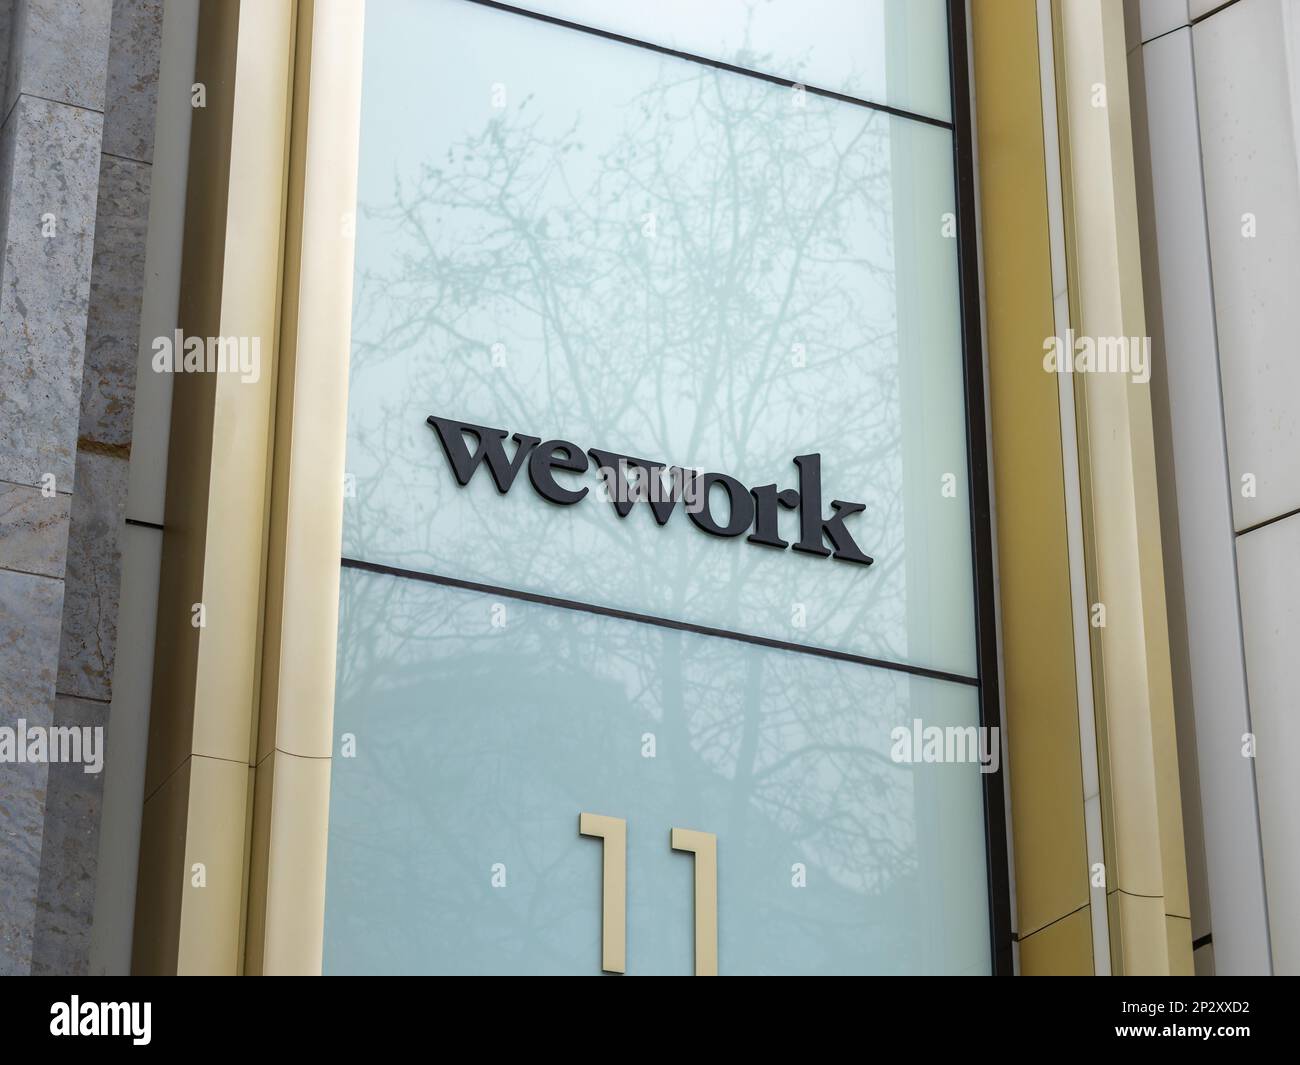 WeWork logo on a building exterior. Provider of co-working office spaces and shared spaces in the city of Berlin. American start up company. Stock Photo